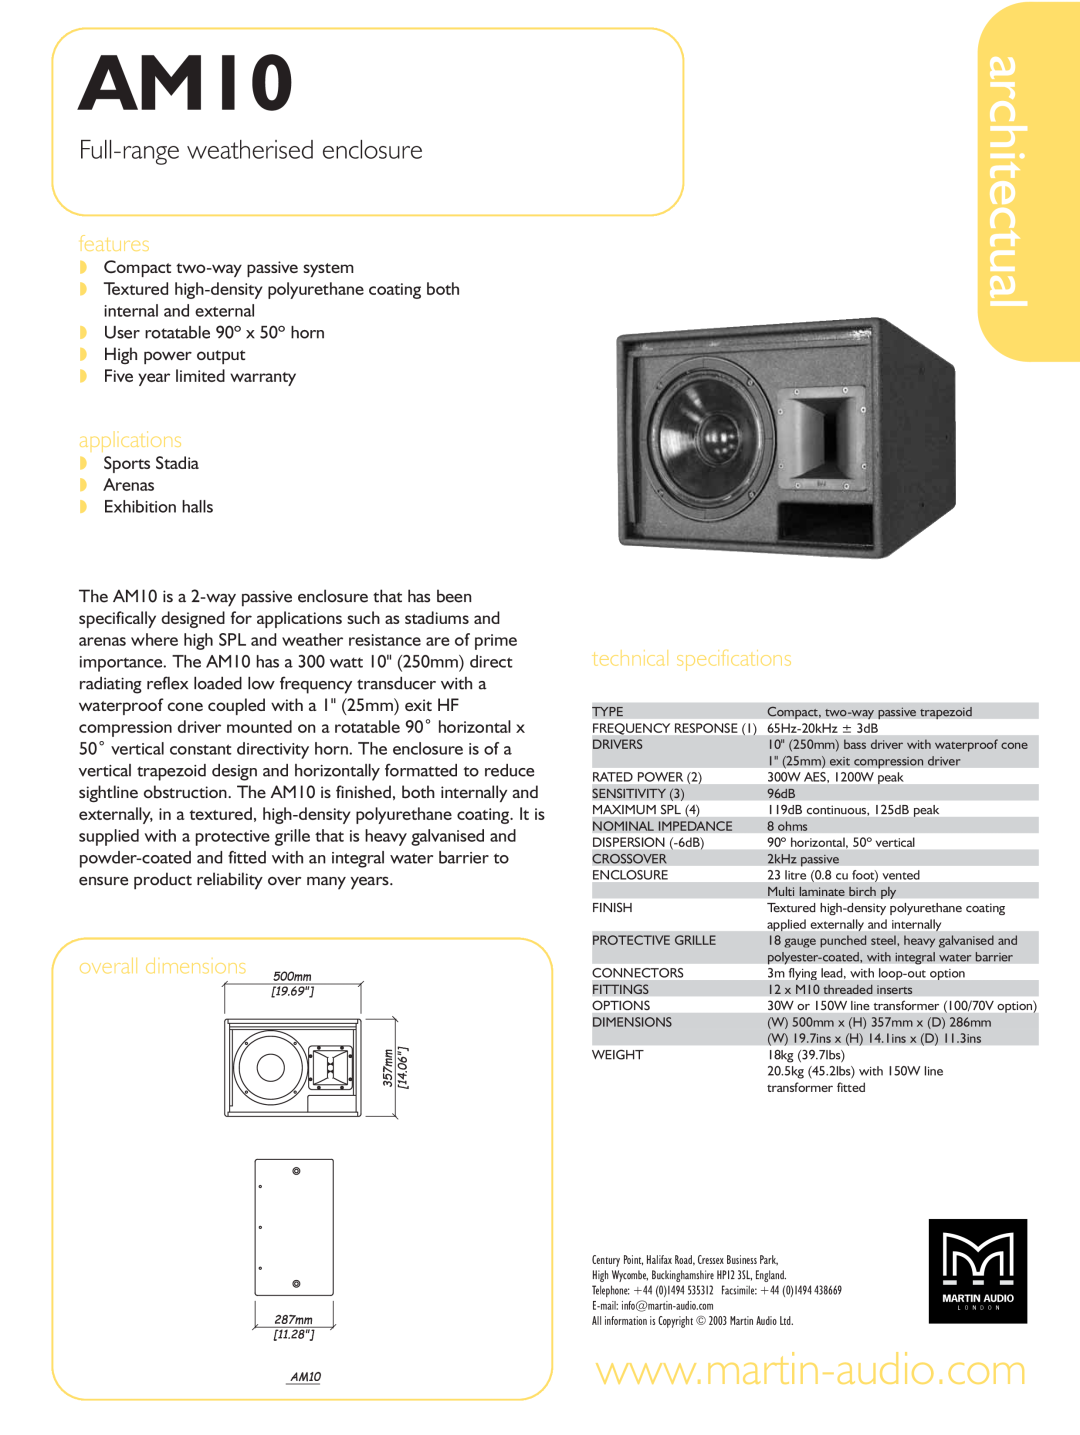 Martin Audio AM10 technical specifications architectual, Full-rangeweatherised enclosure, features, applications 